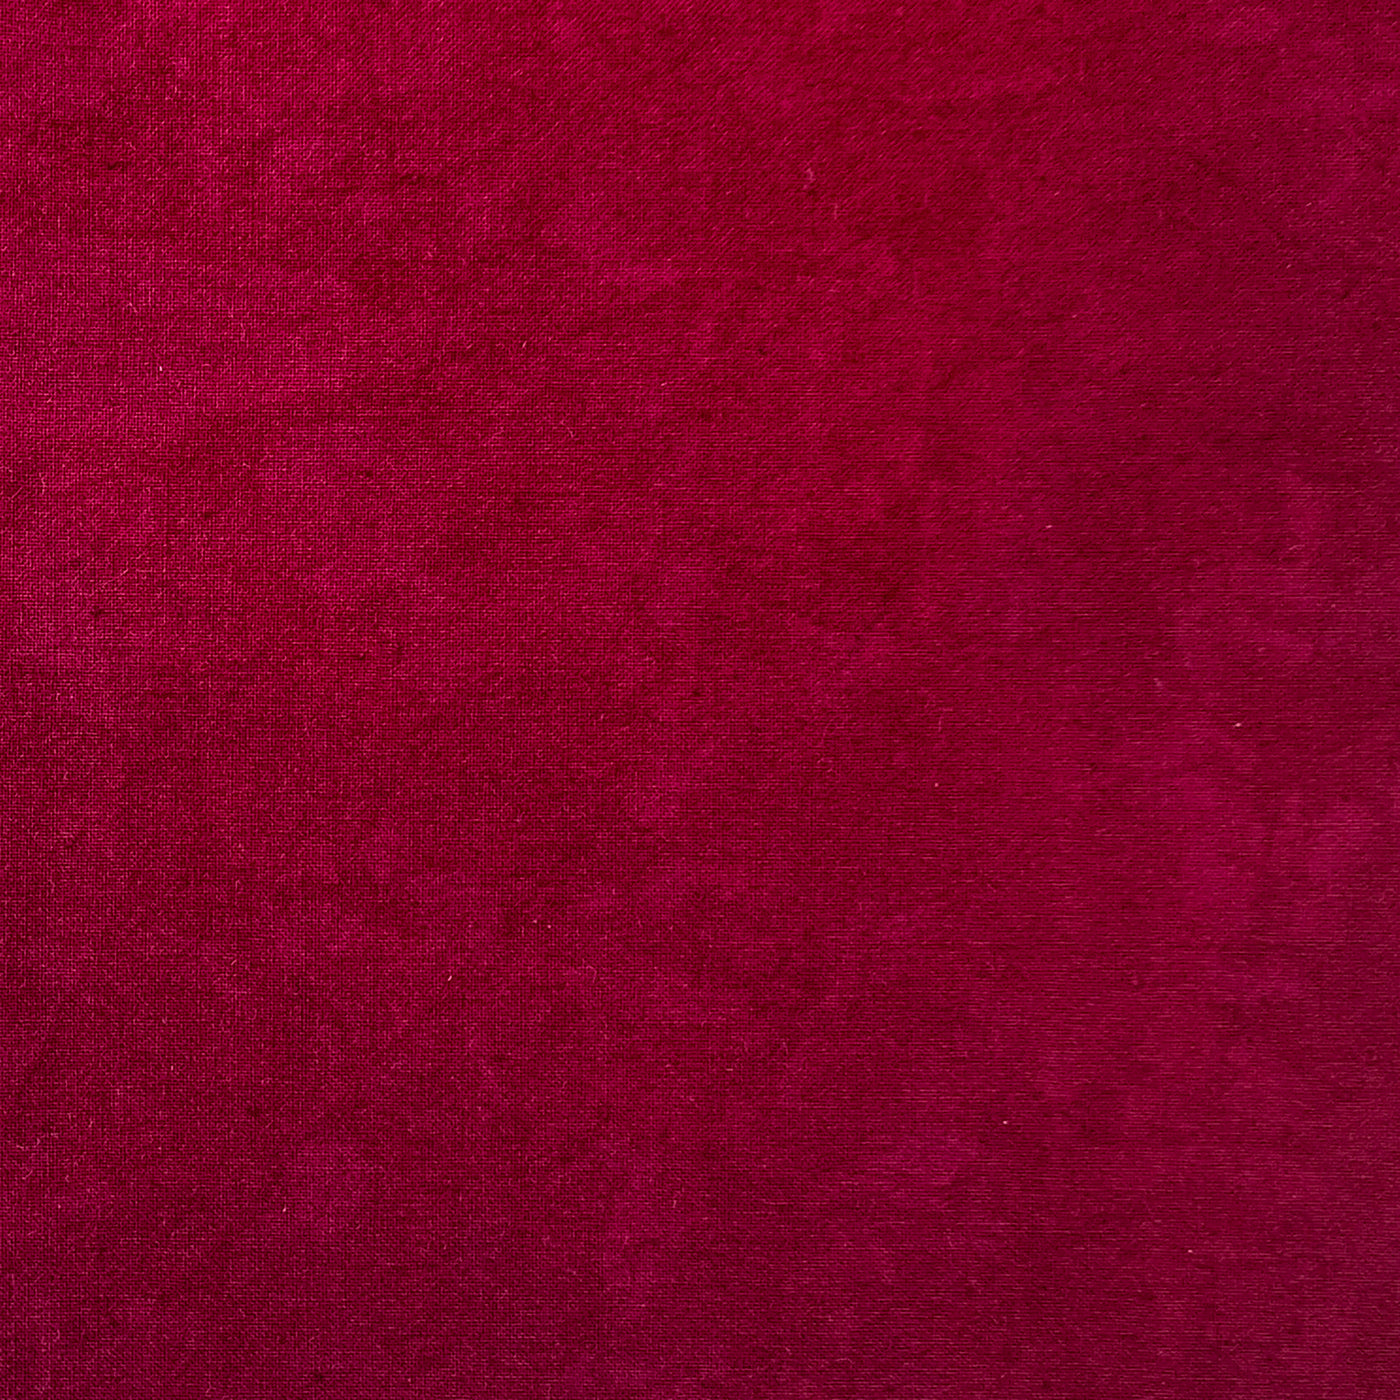 Cherrywood Hand Dyed Fabric - Berry Stain 1200